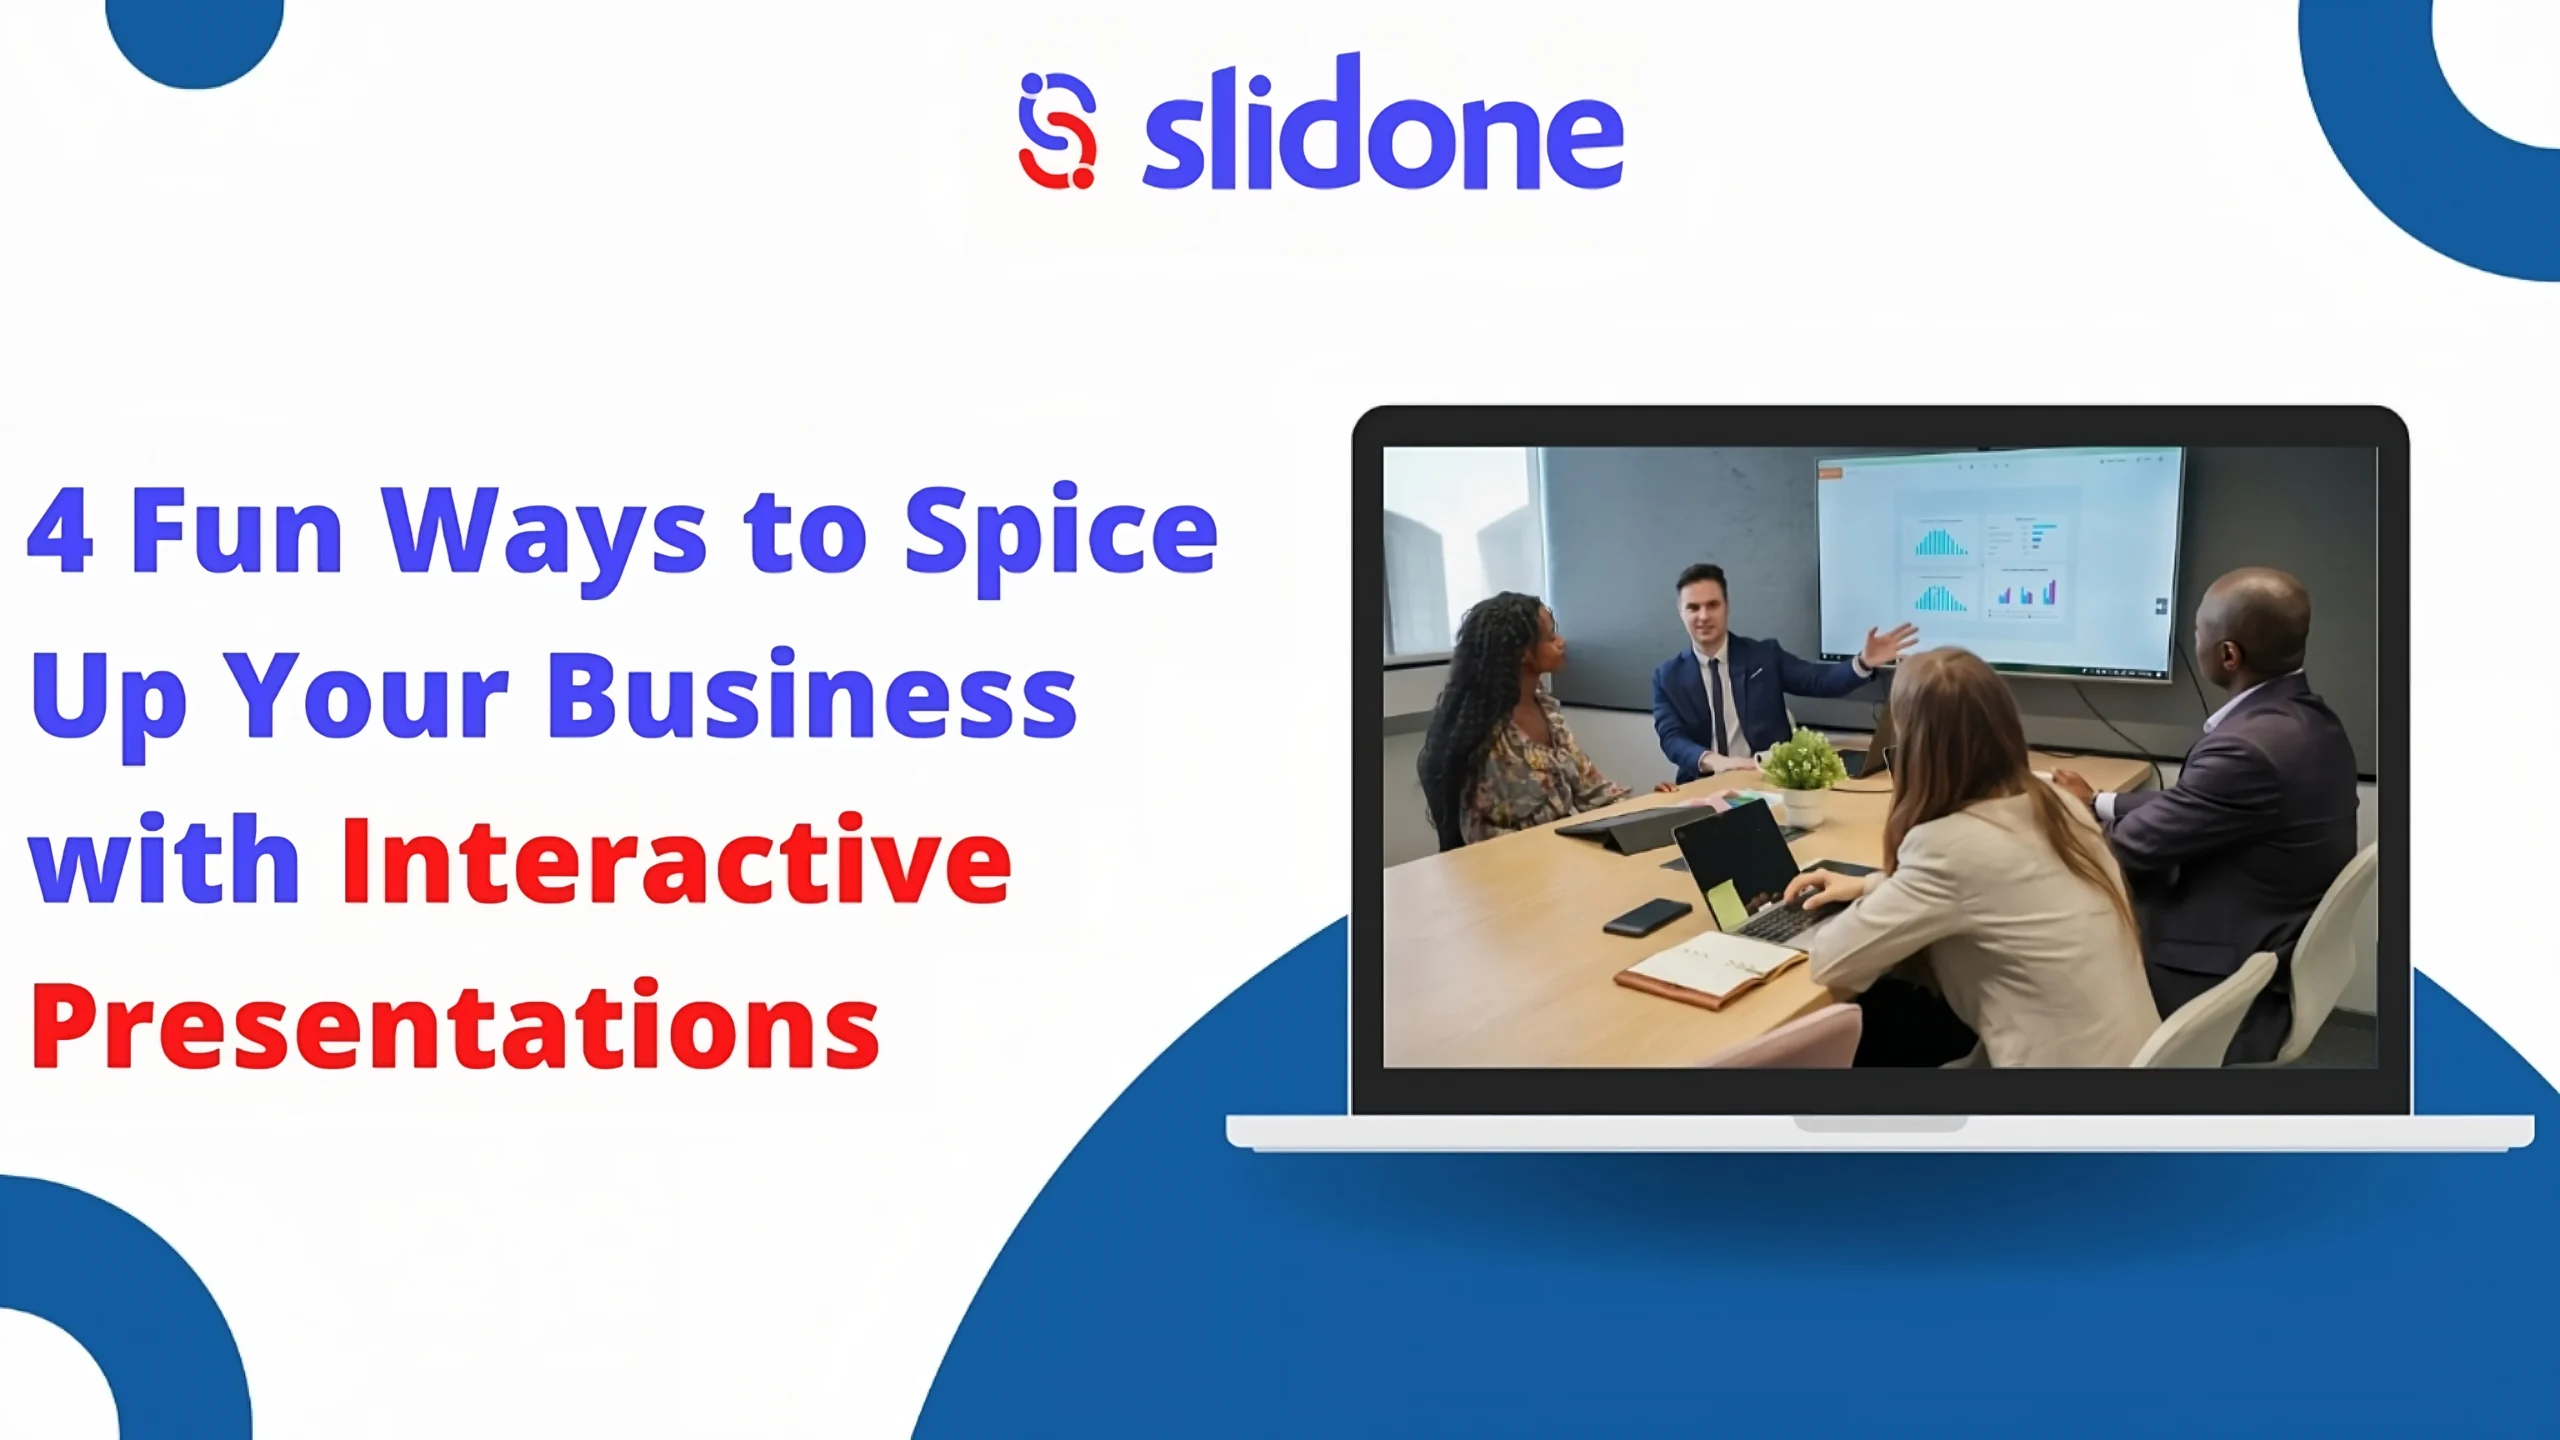 4 Fun Ways to Spice Up Your Business with Interactive Presentations